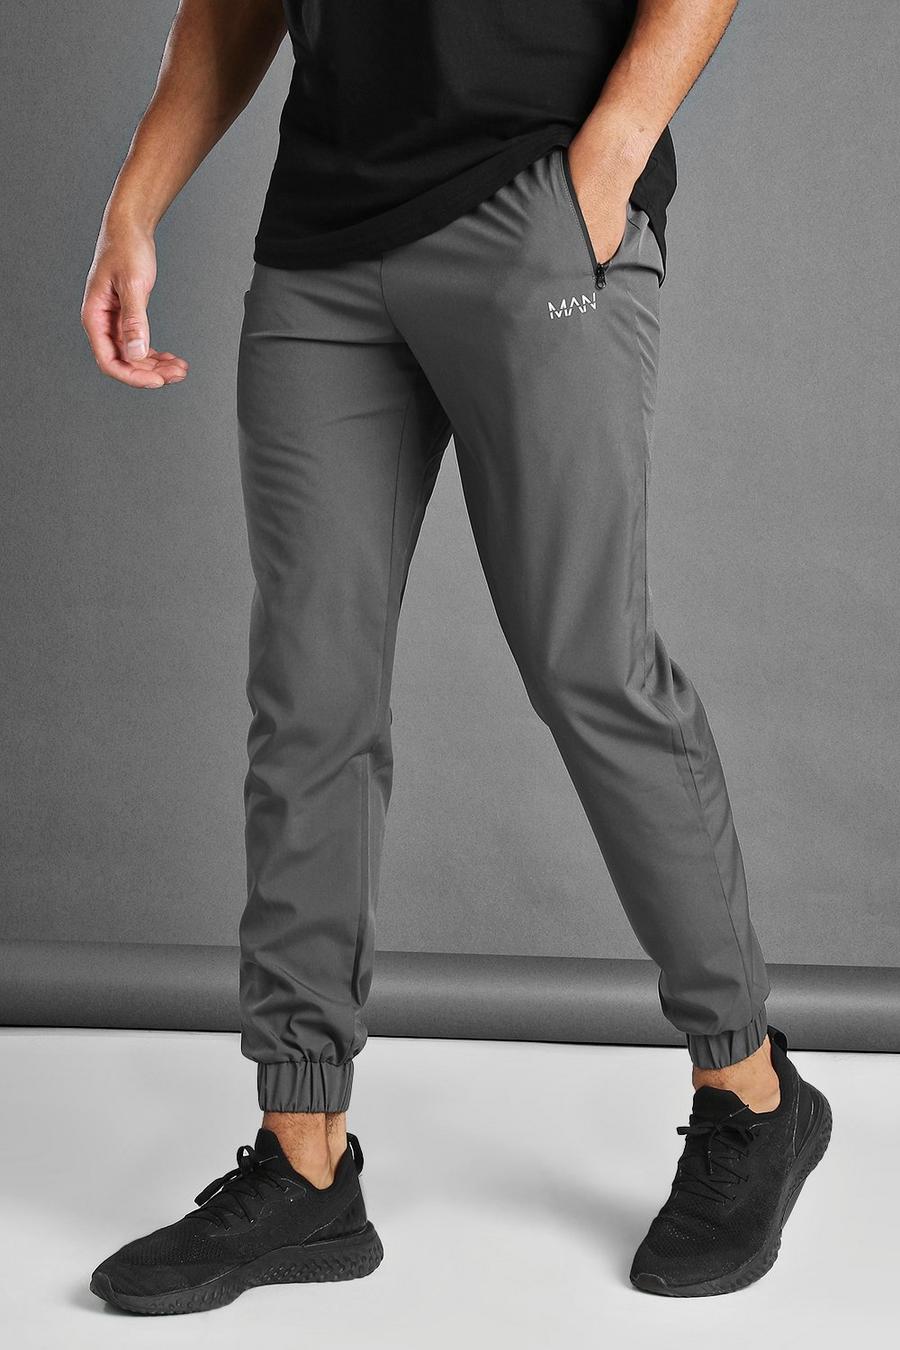 Charcoal grey Man Active Tapered Jogger With Man Waistband